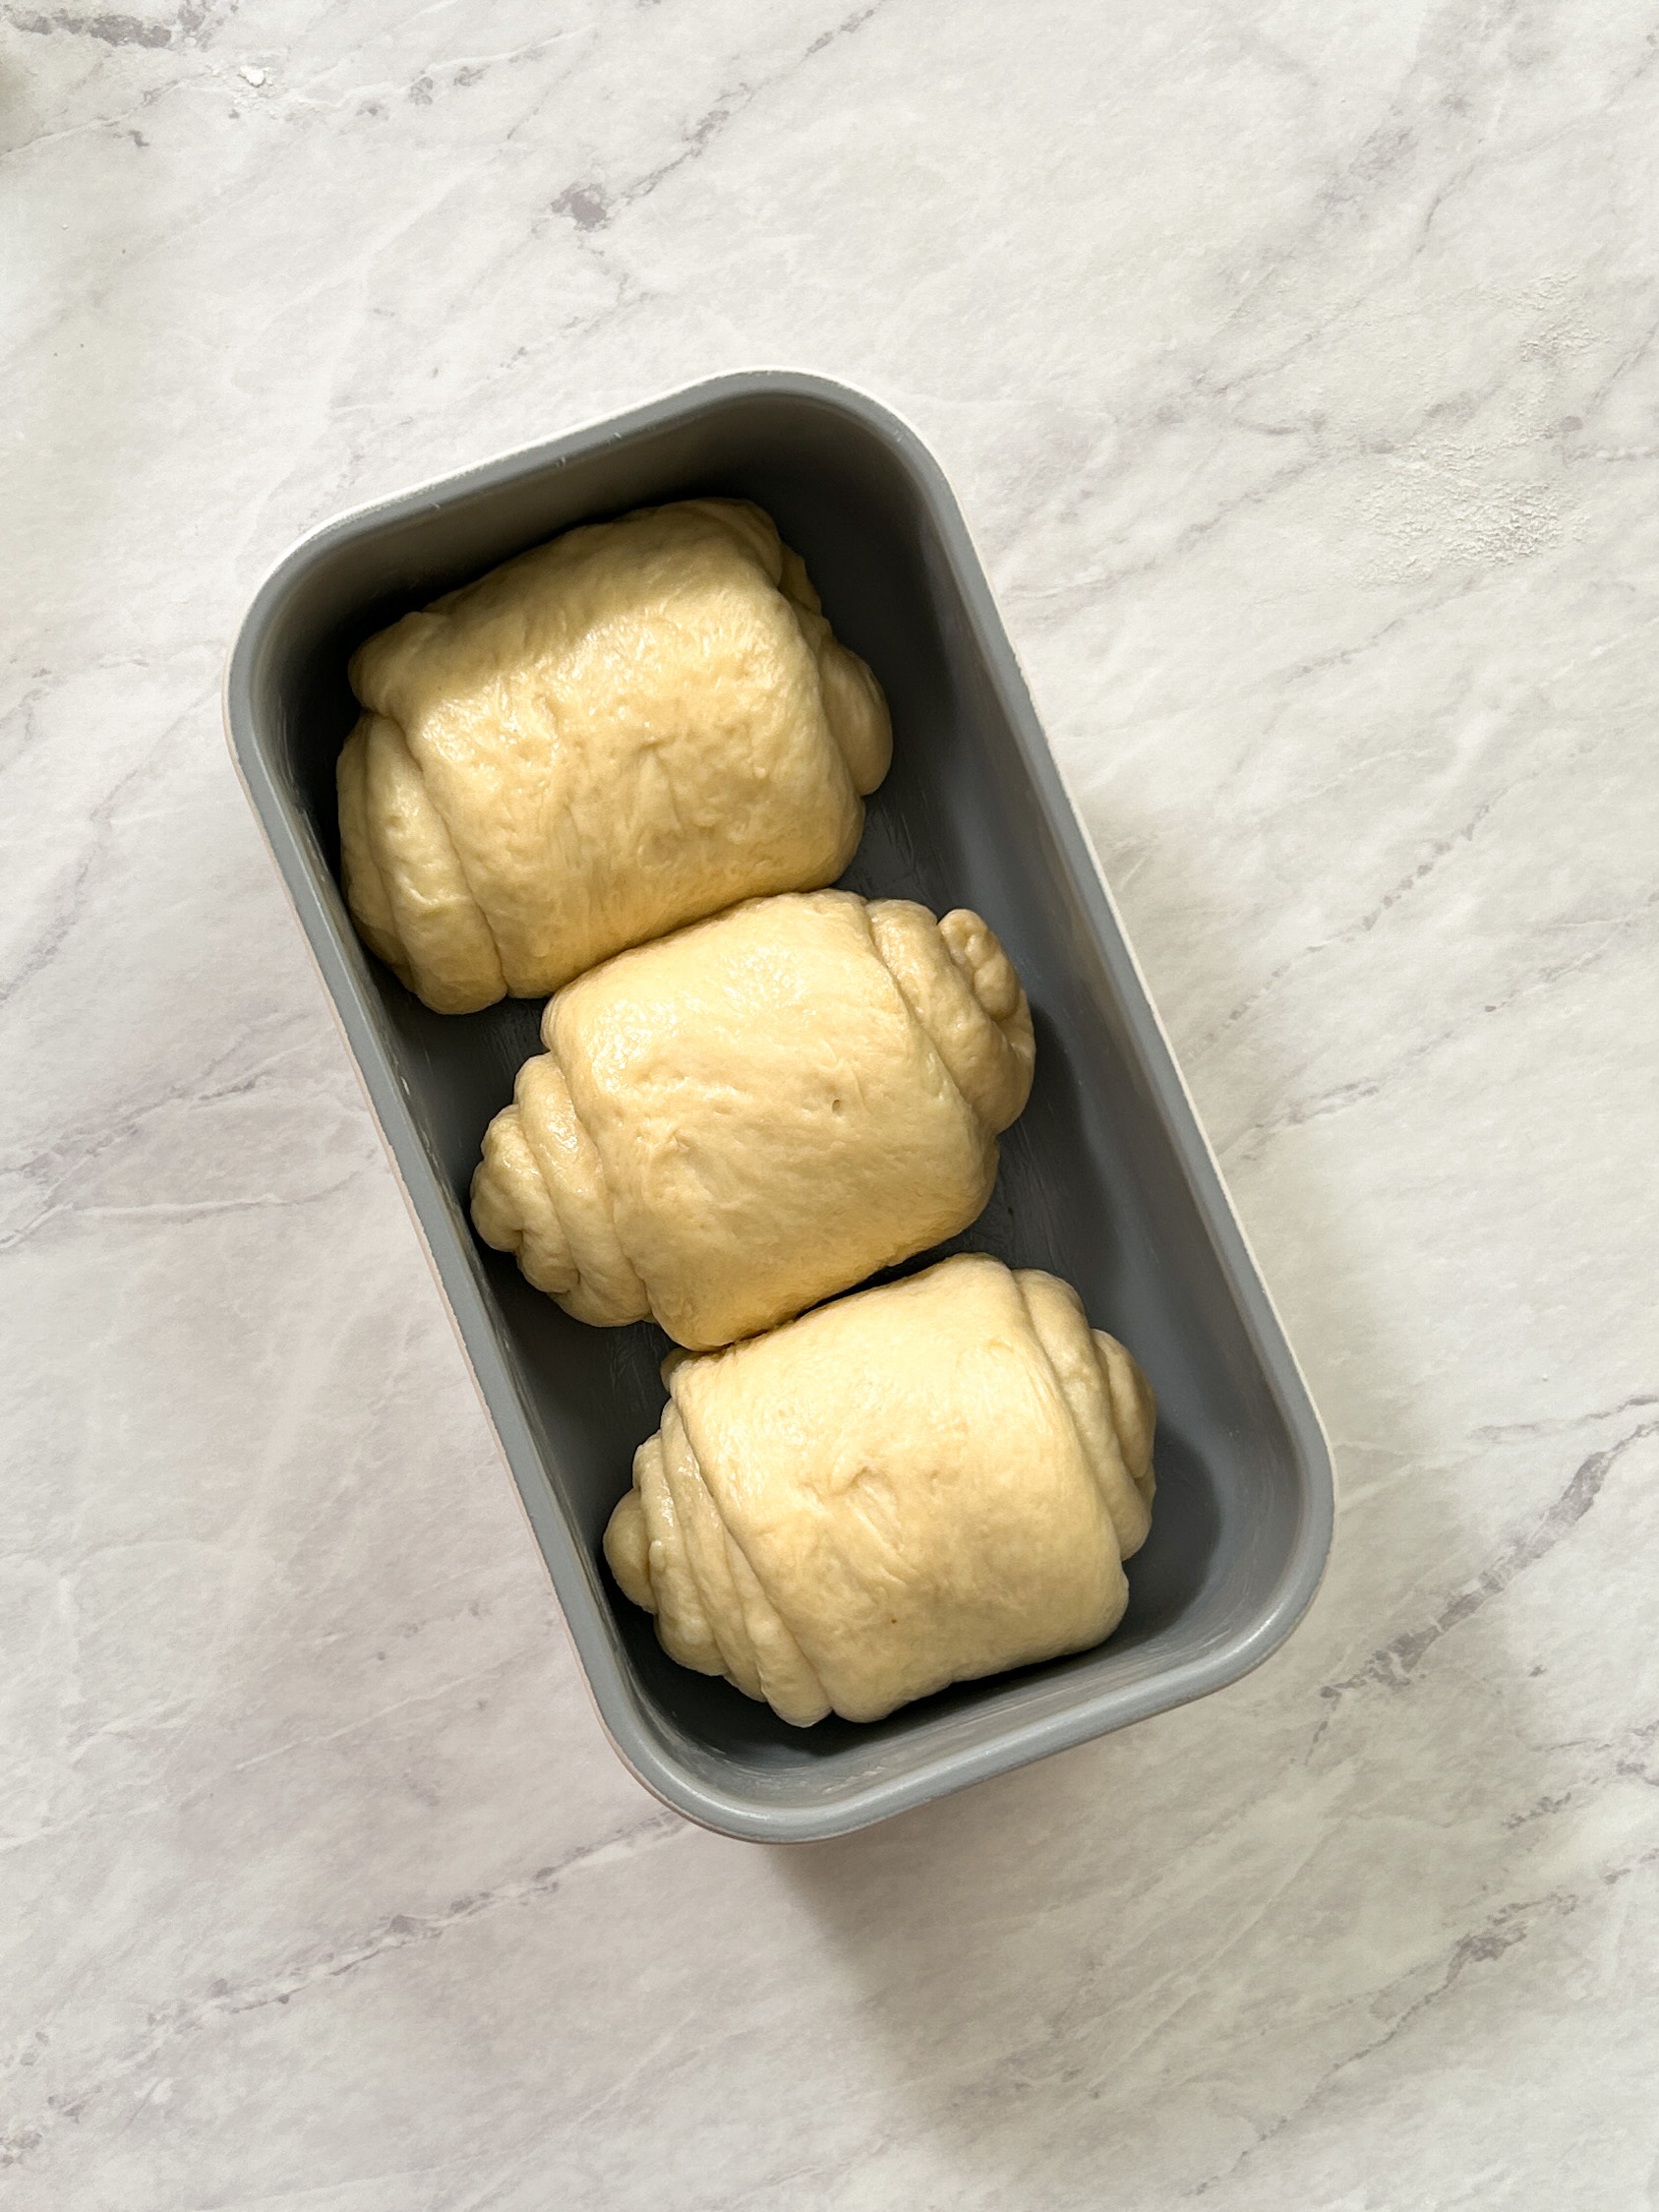 3 rolls of dough in a bread loaf pan before proofing